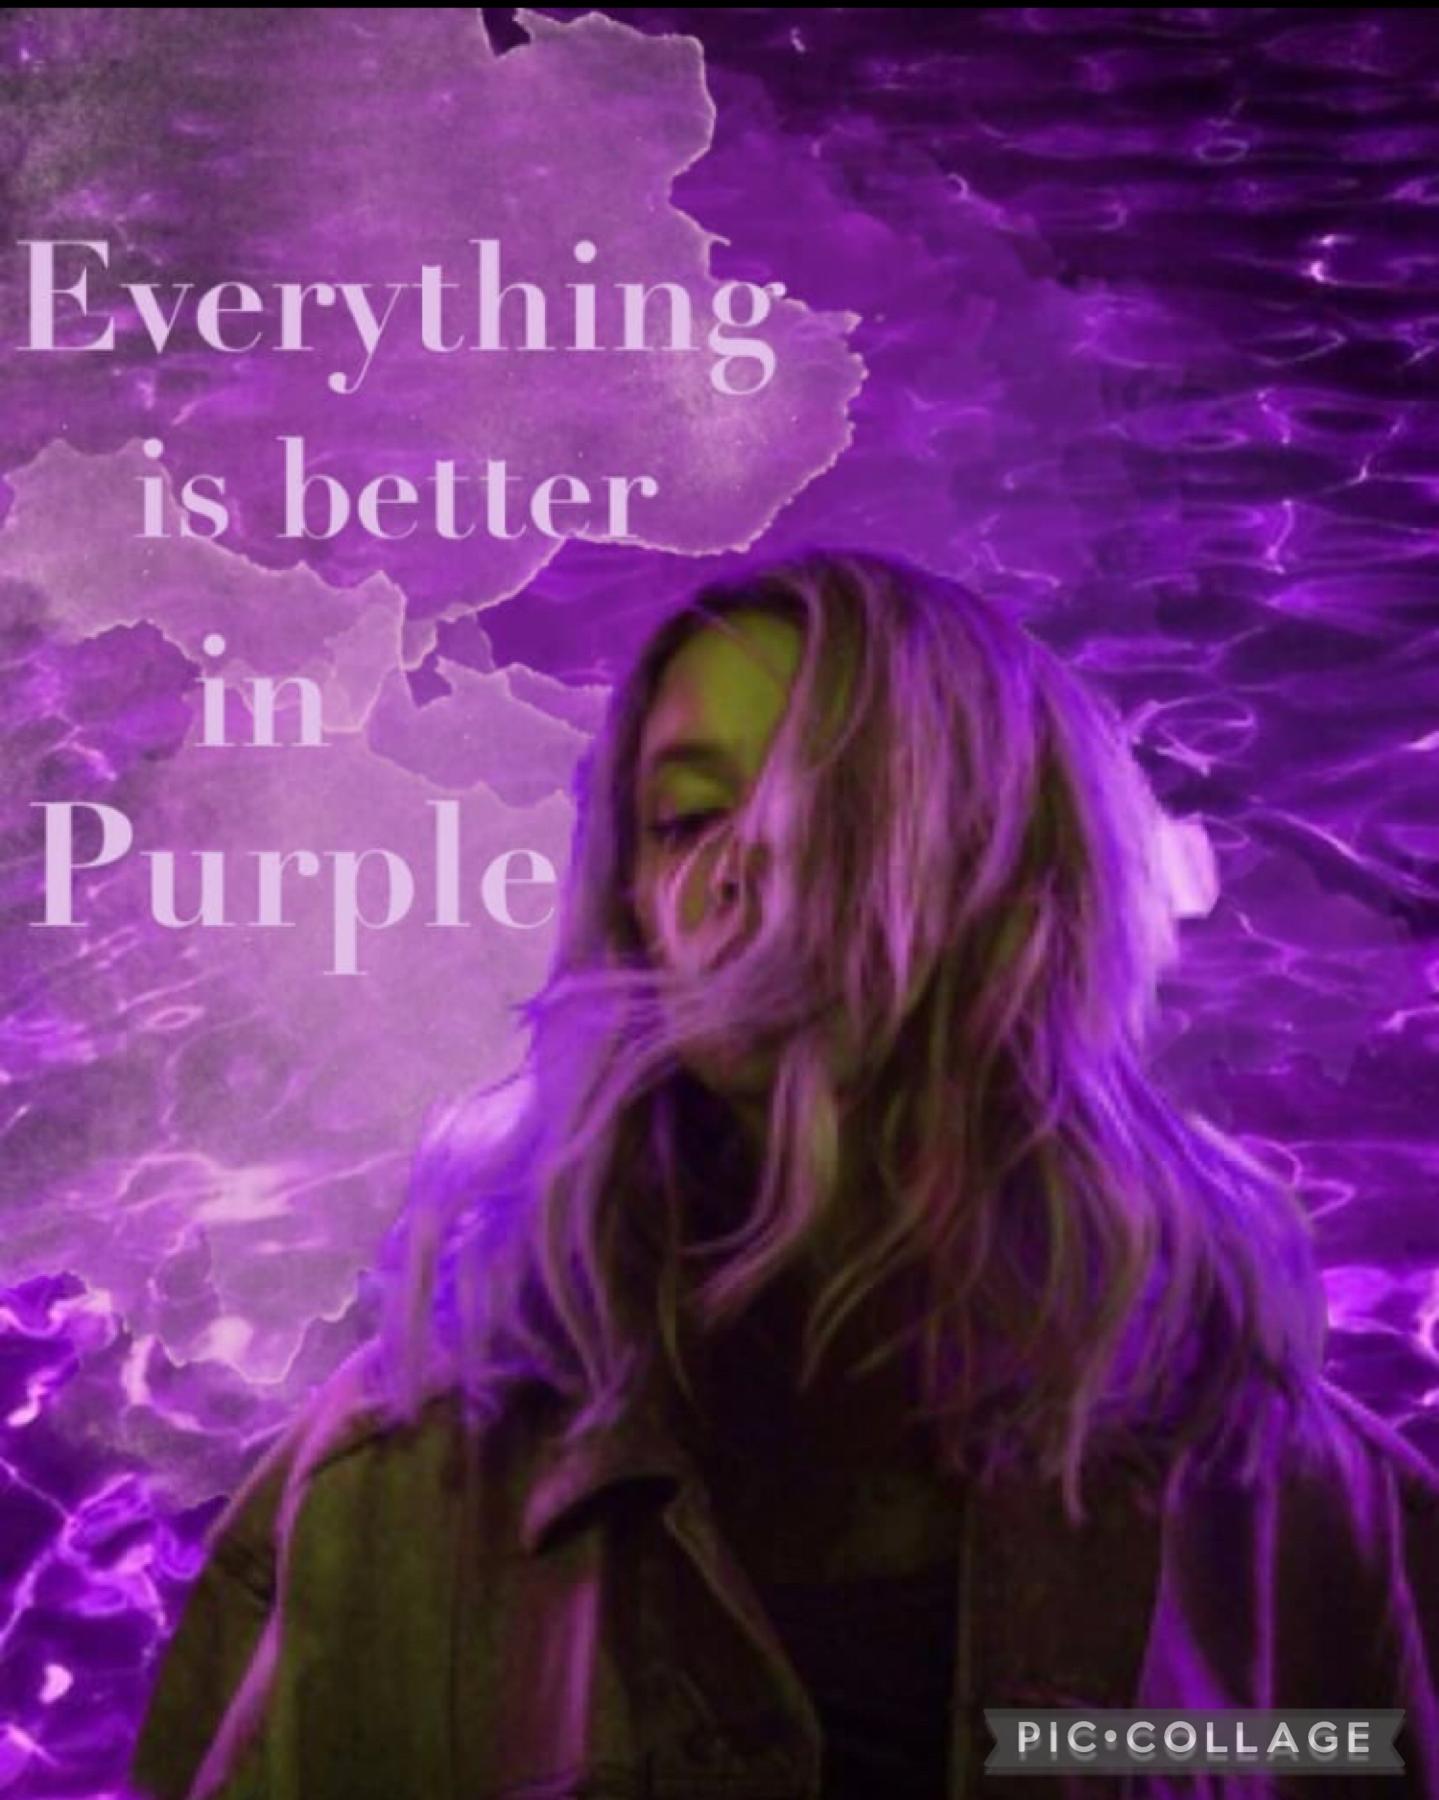 21.10.21 Dark Purple aesthetic collage and entry for SonicTheGreat’s contest 